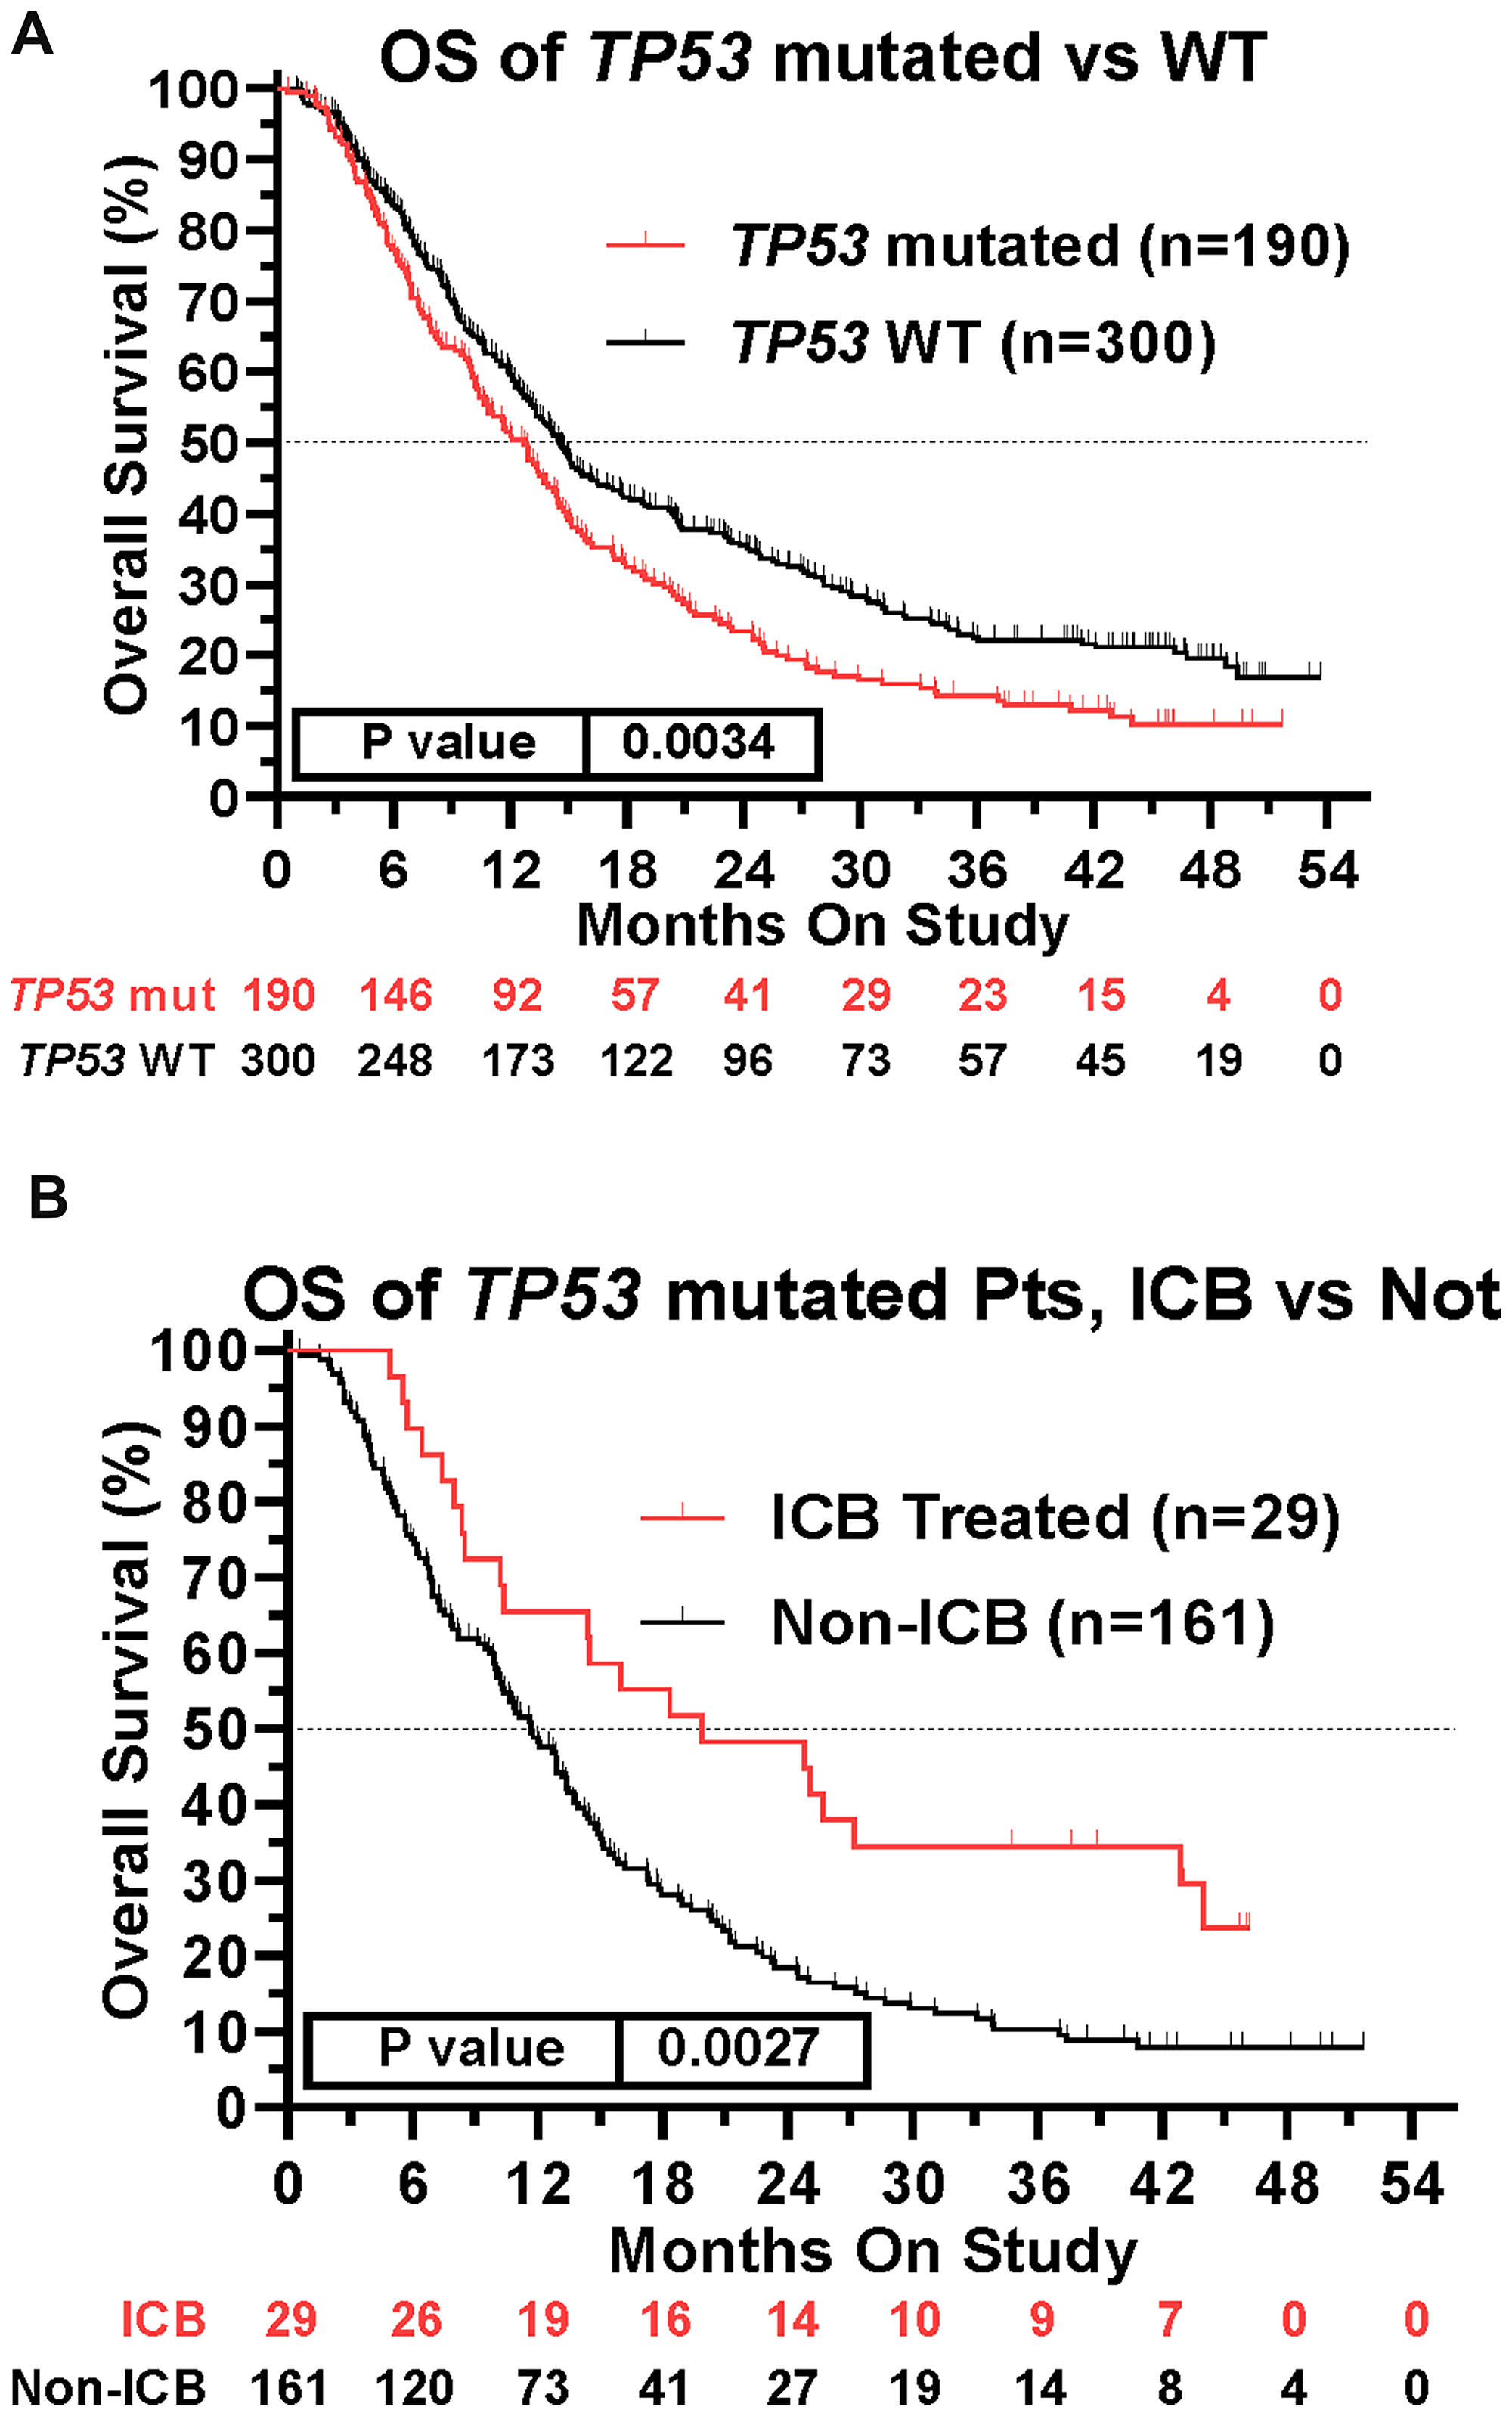 Impact of TP53 tumor mutation on survival and ICB treatment.